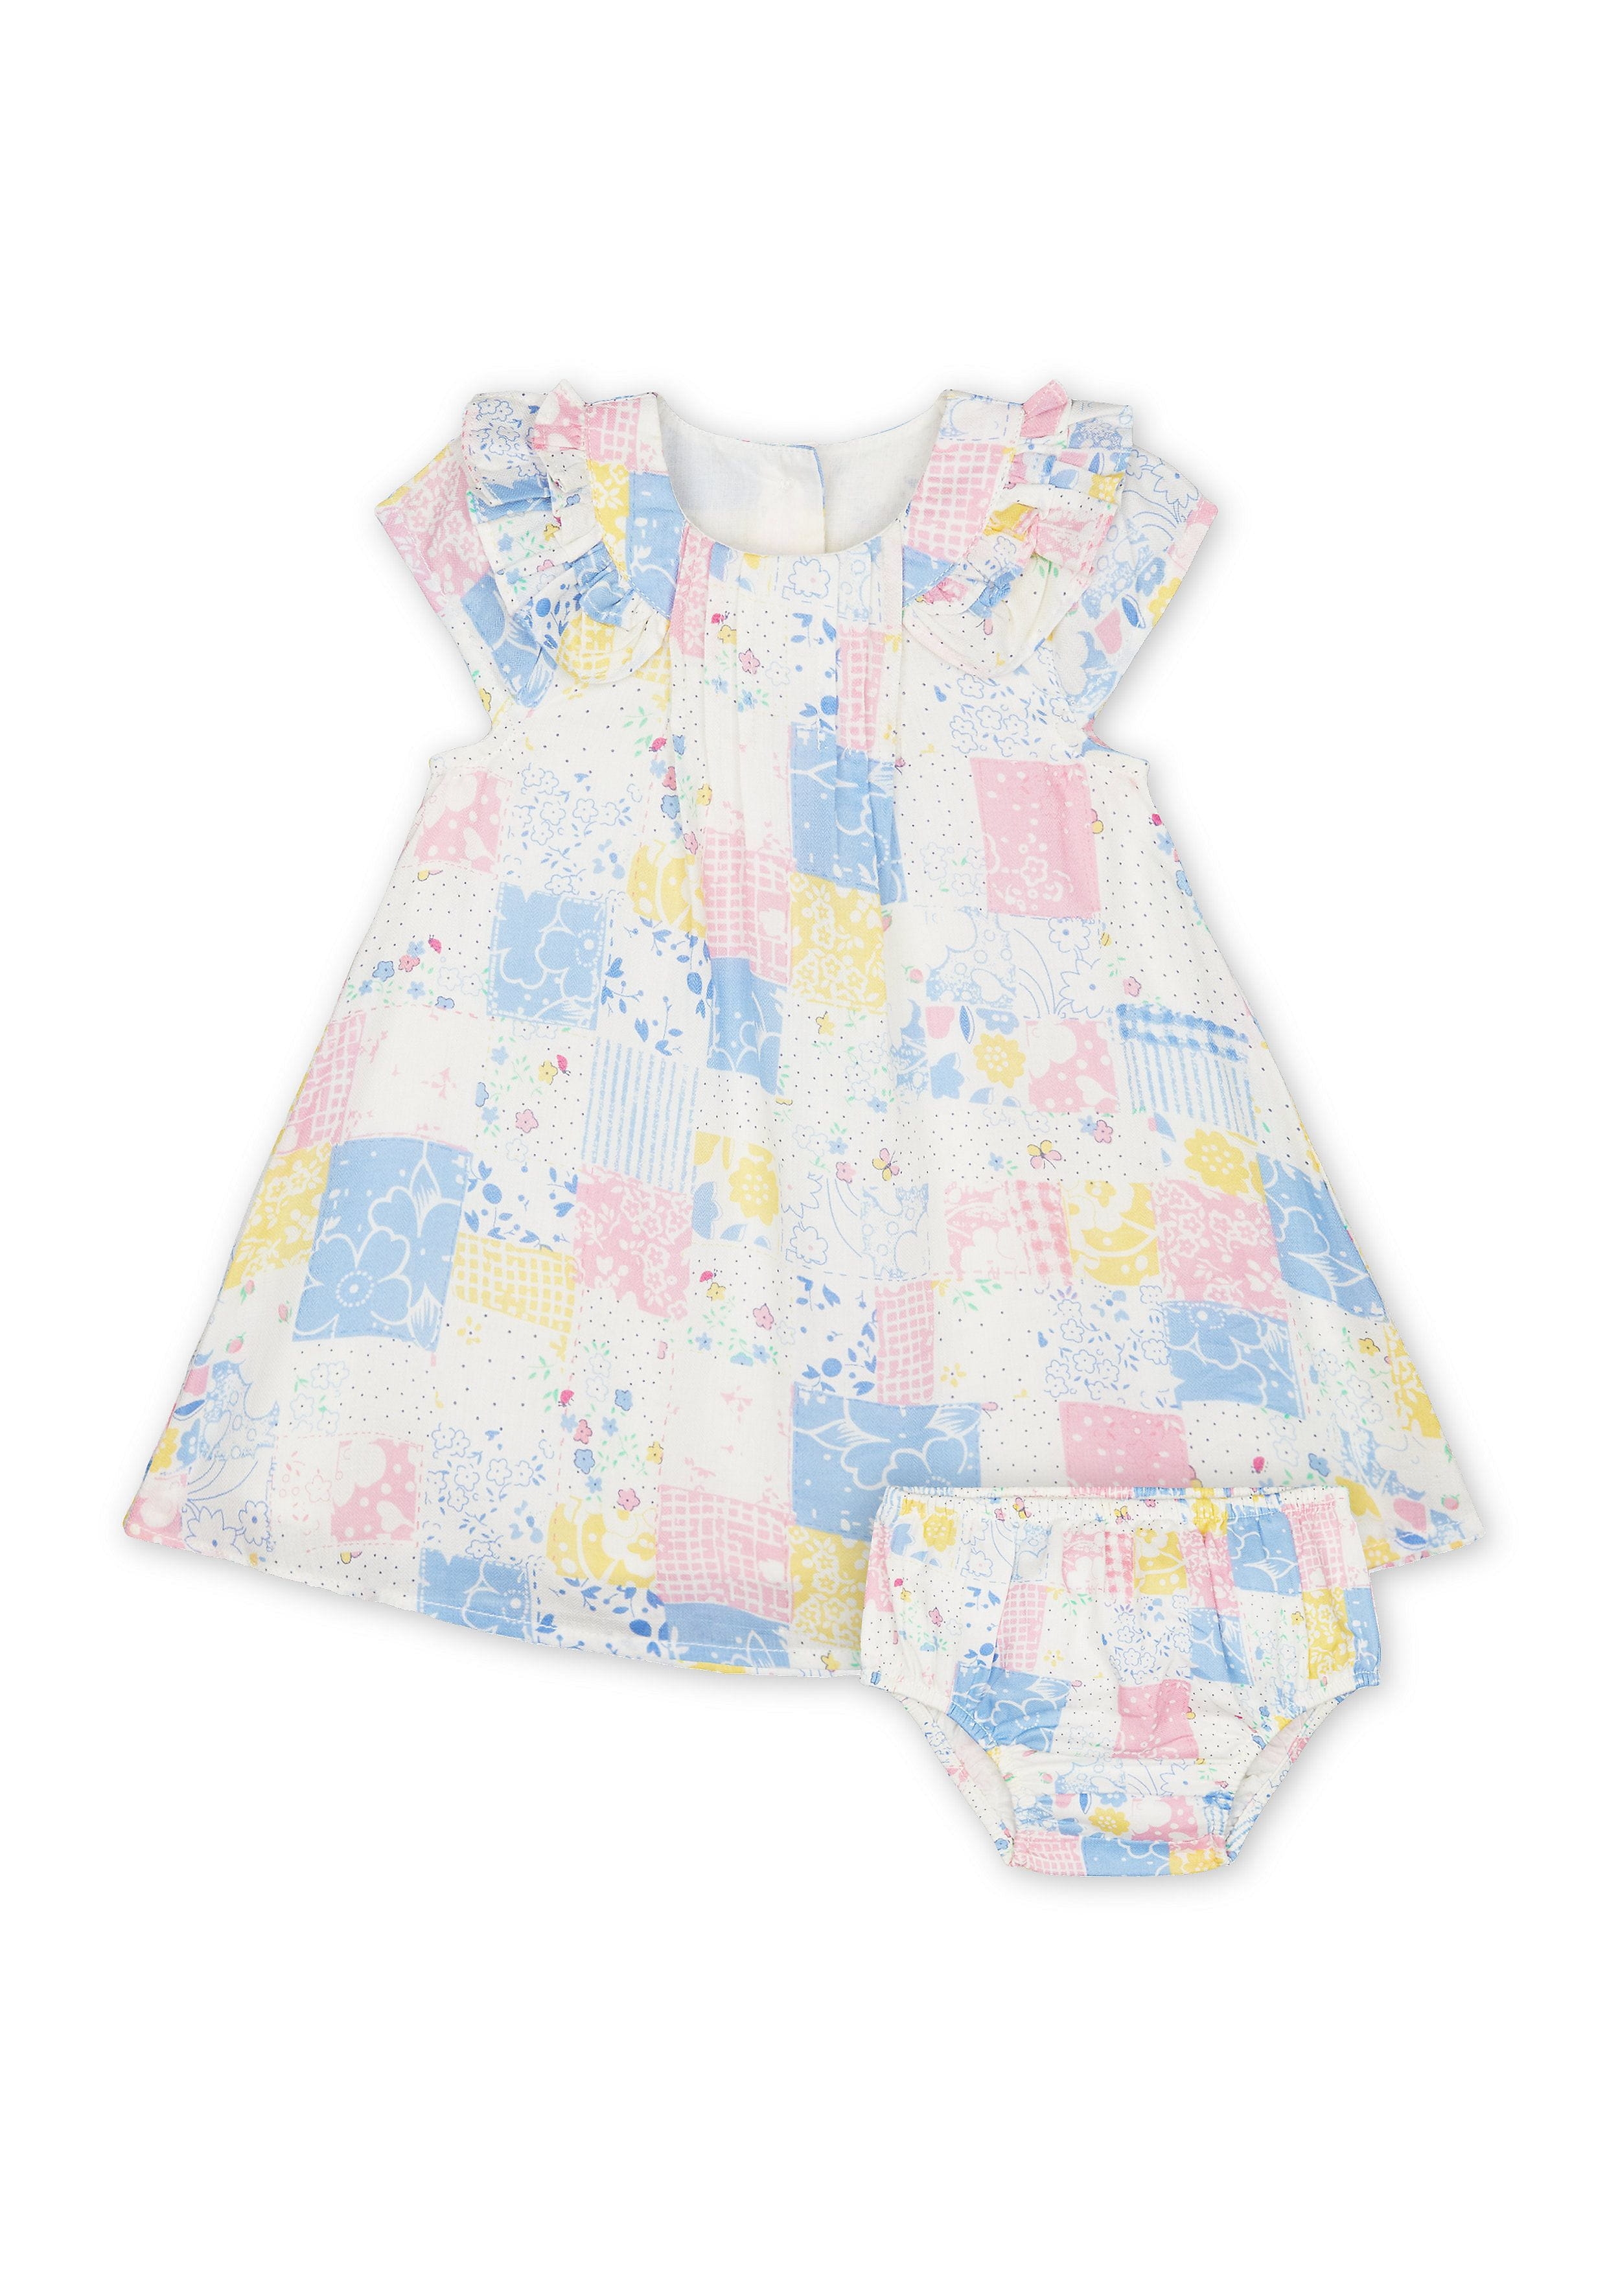 Mothercare | Girls Half Sleeves Dress With Knickers Printed With Frill Details - Multicolor 0